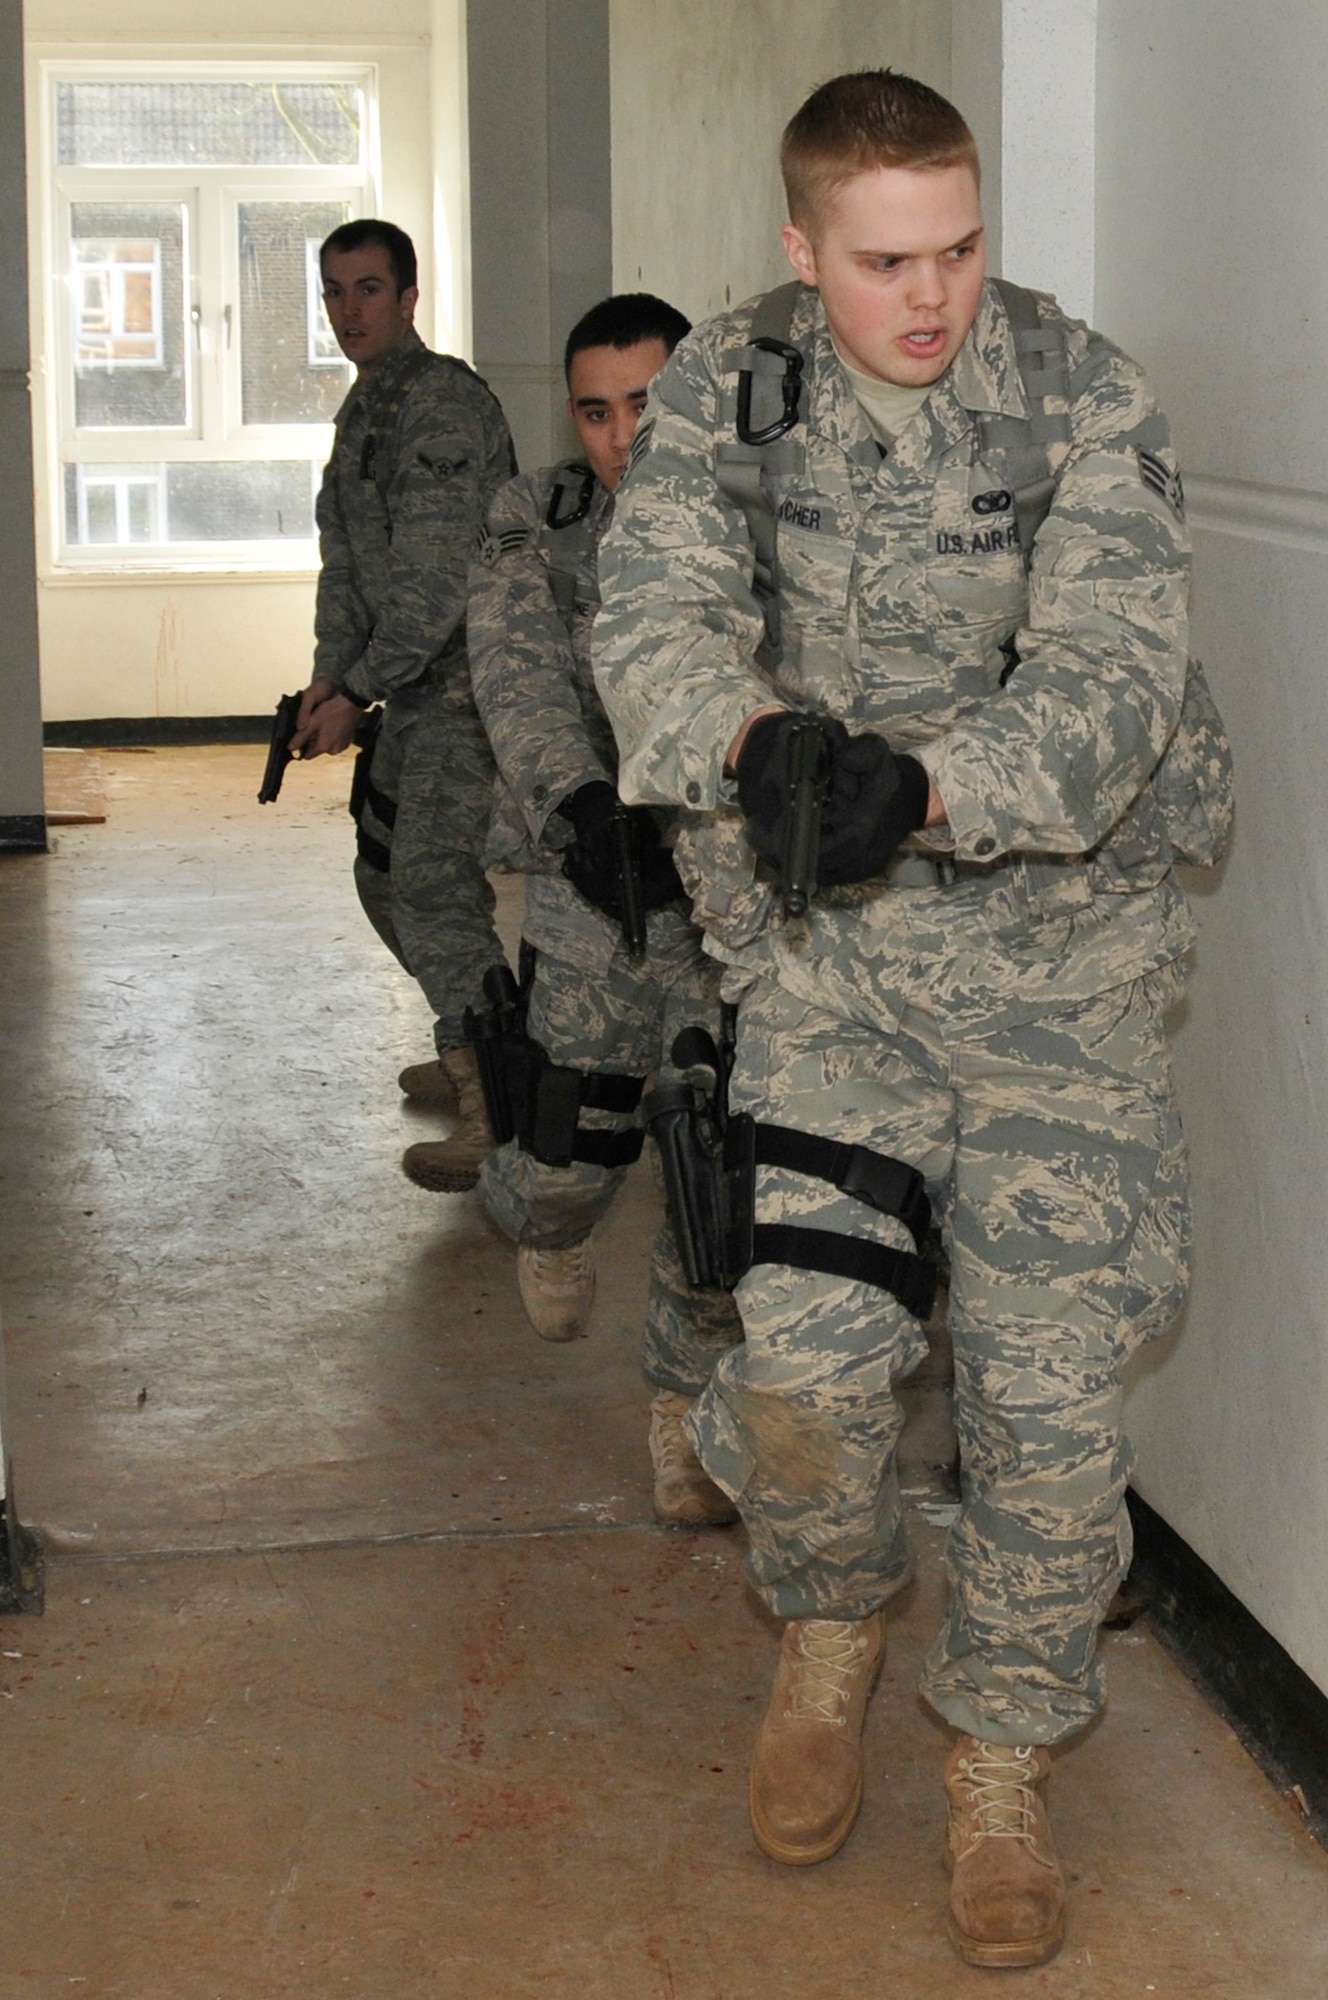 Airmen from the 48th Security Forces Squadron search each room to make sure there are no longer any more suspects or children in the school during a training exercise March 4, 2009 at RAF Feltwell, England. The Airmen are participating in an "Active Shooter" scenario which teaches security forces Airmen how to handle a school shooting. (U.S. Air Force photo by Airman 1st Class Perry Aston) 